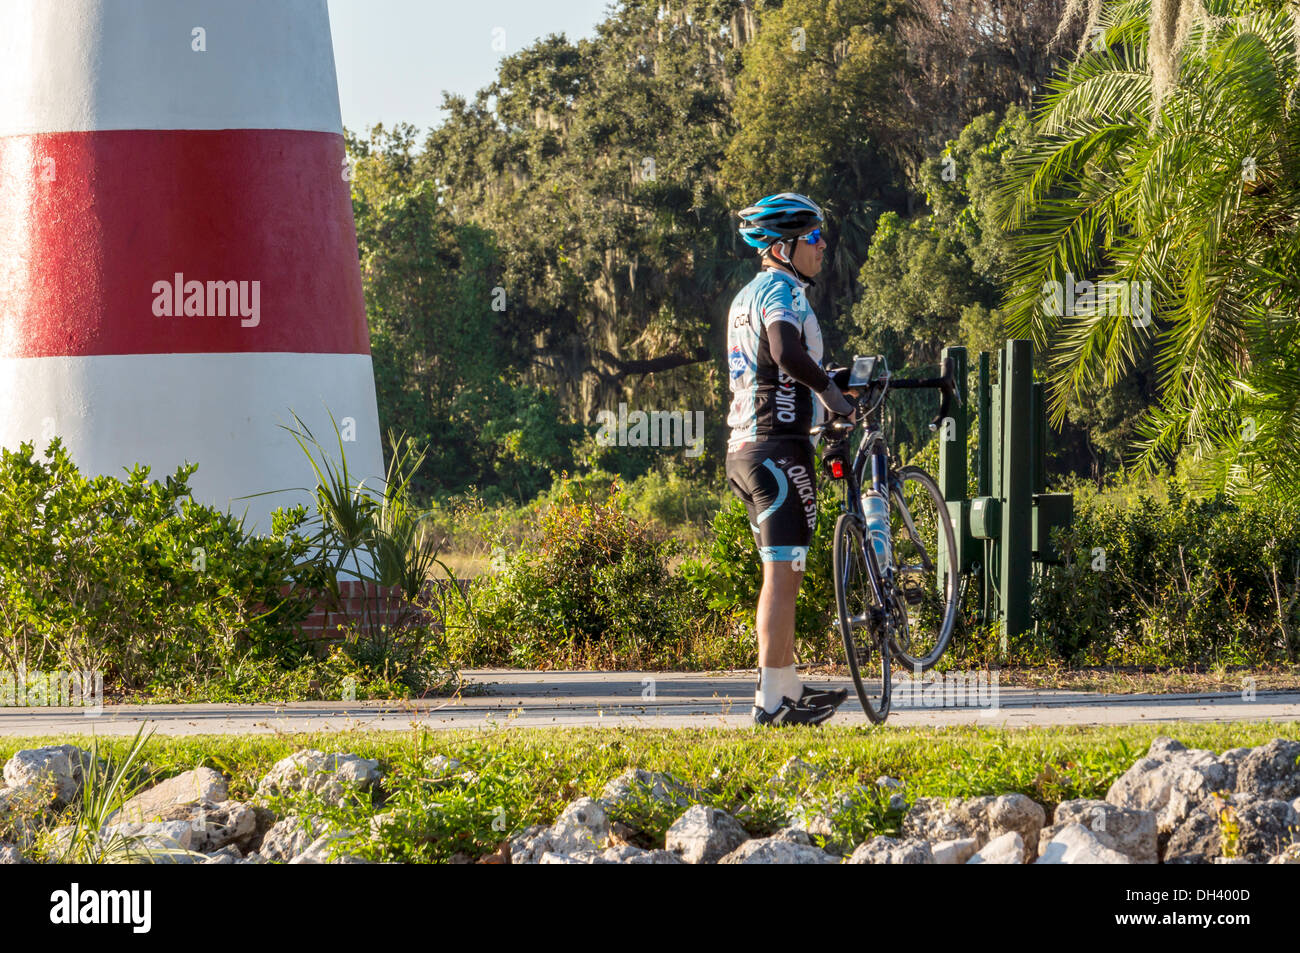 Athletic man with racing bicycle and wearing safety helmet and riding gear at the base of the Mount Dora lighthouse beacon. Stock Photo